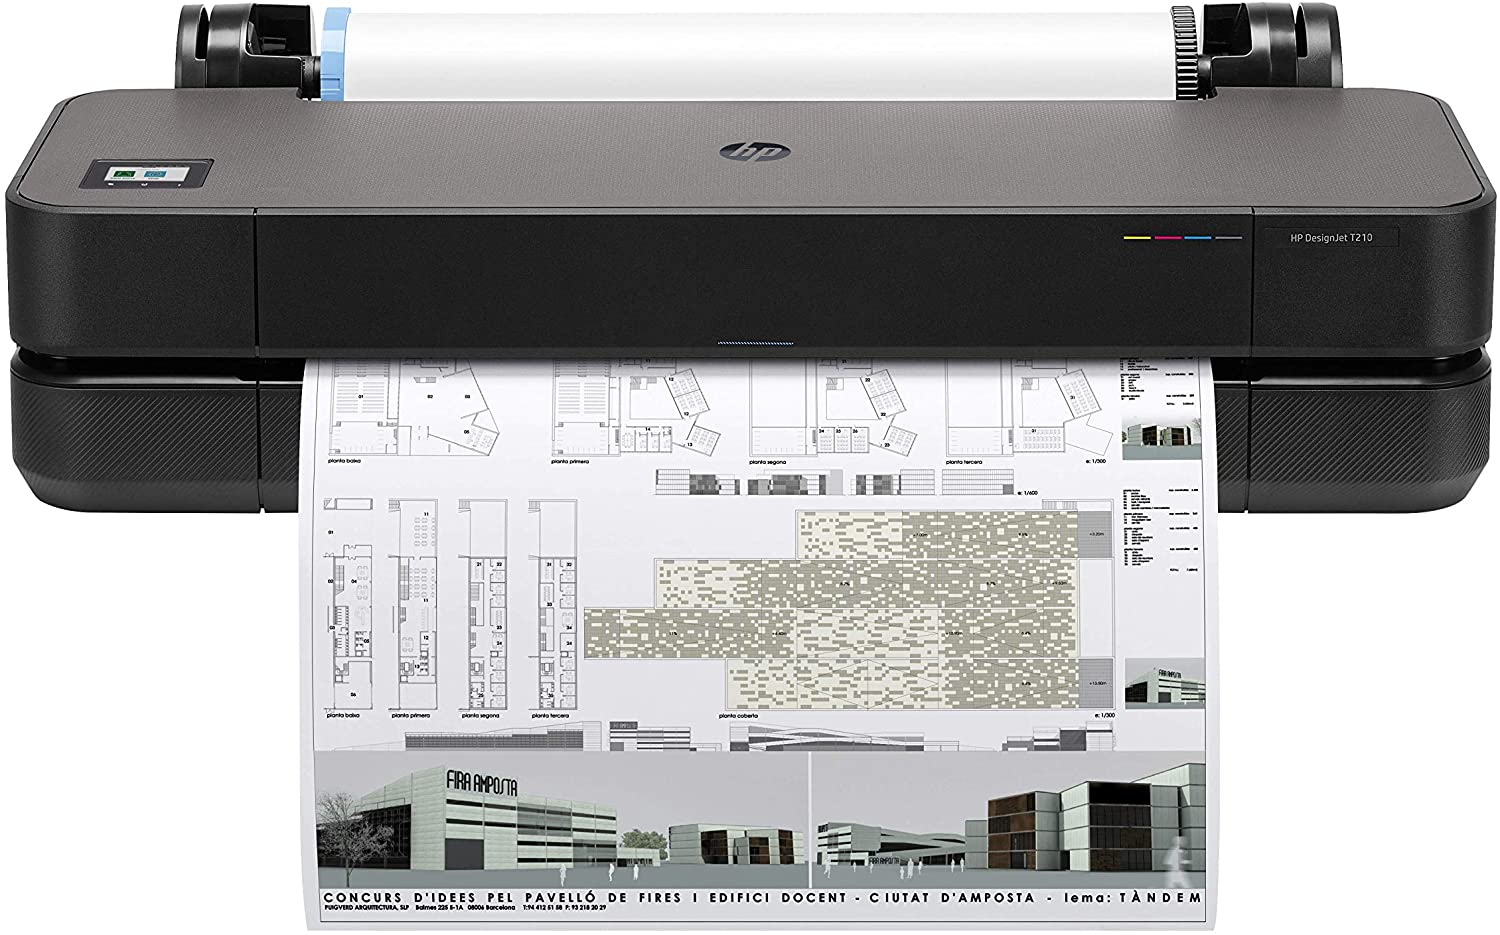 HP DesignJet T210 Large Format Compact Wireless Plotter Printer - 24" , with Modern Office Design (8AG32A) + Alliance CAD Paper Rolls, 24” (blundle)